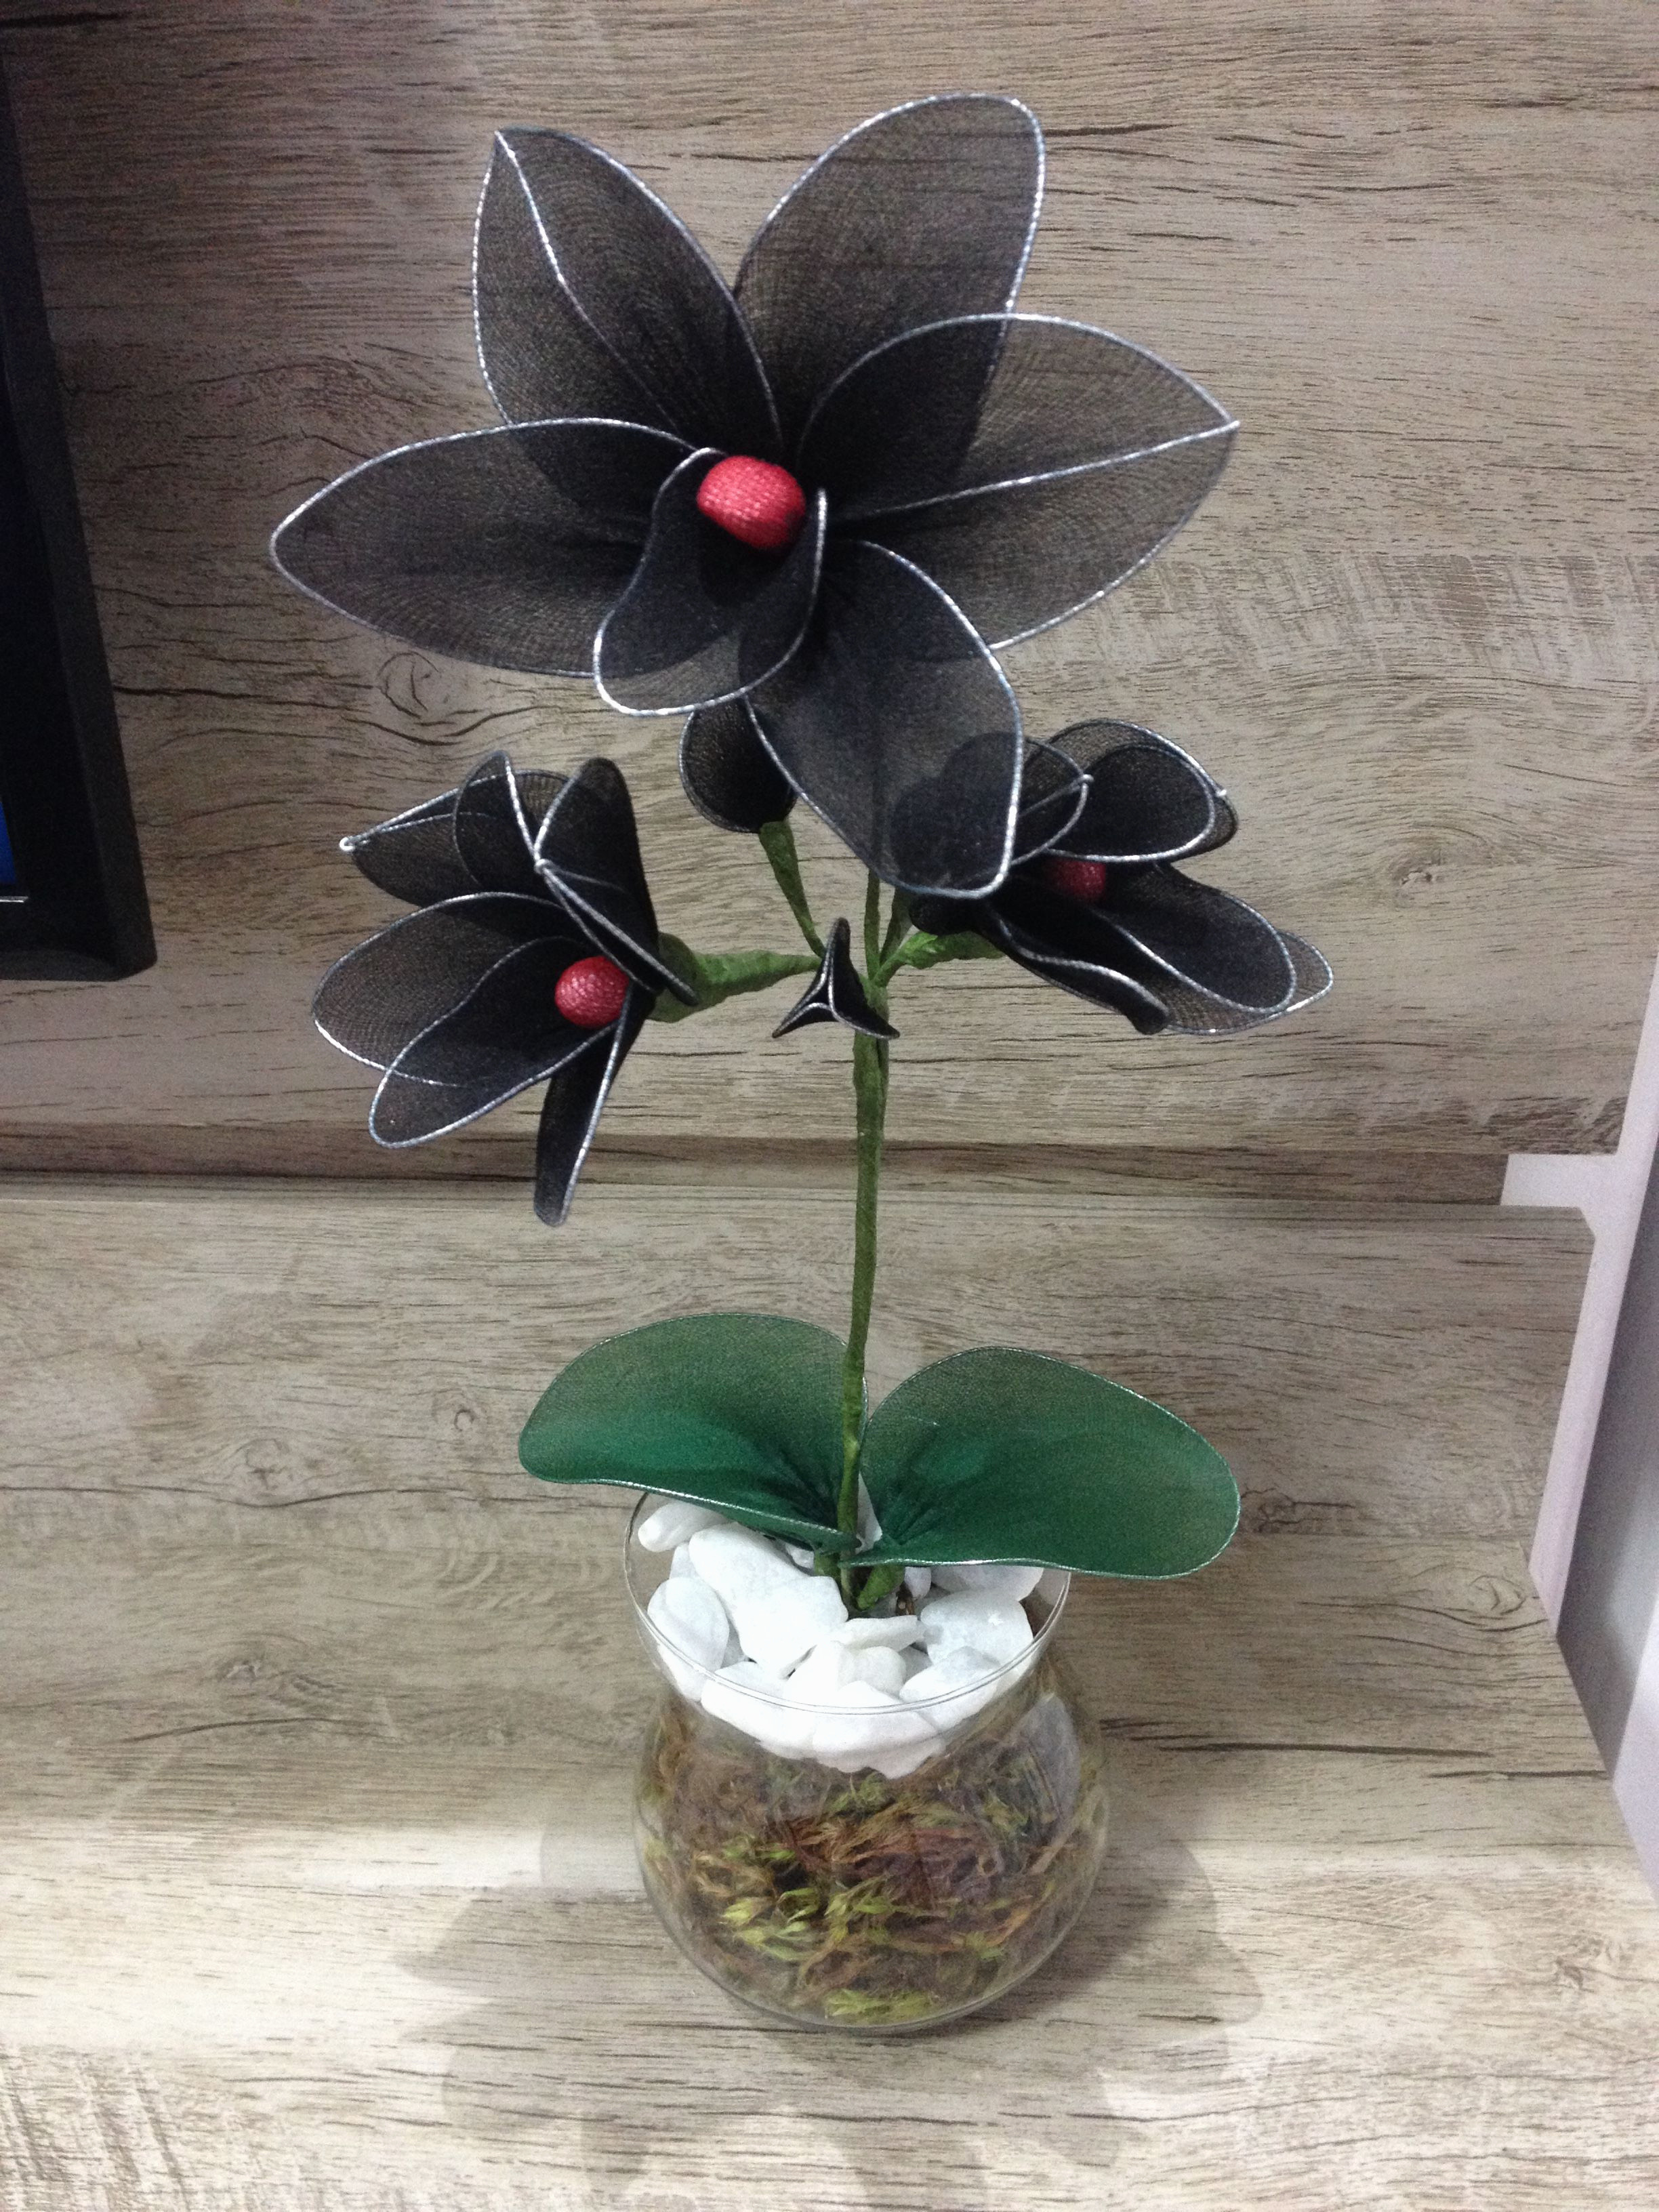 23 Recommended Silver Vase orchids 2024 free download silver vase orchids of 9 lovely black orchid flower pictures best roses flower within lovely orquidea negra cvijeac284e280a0e od najlonki by visnjica mesiac284e280a1 of 9 lovely black